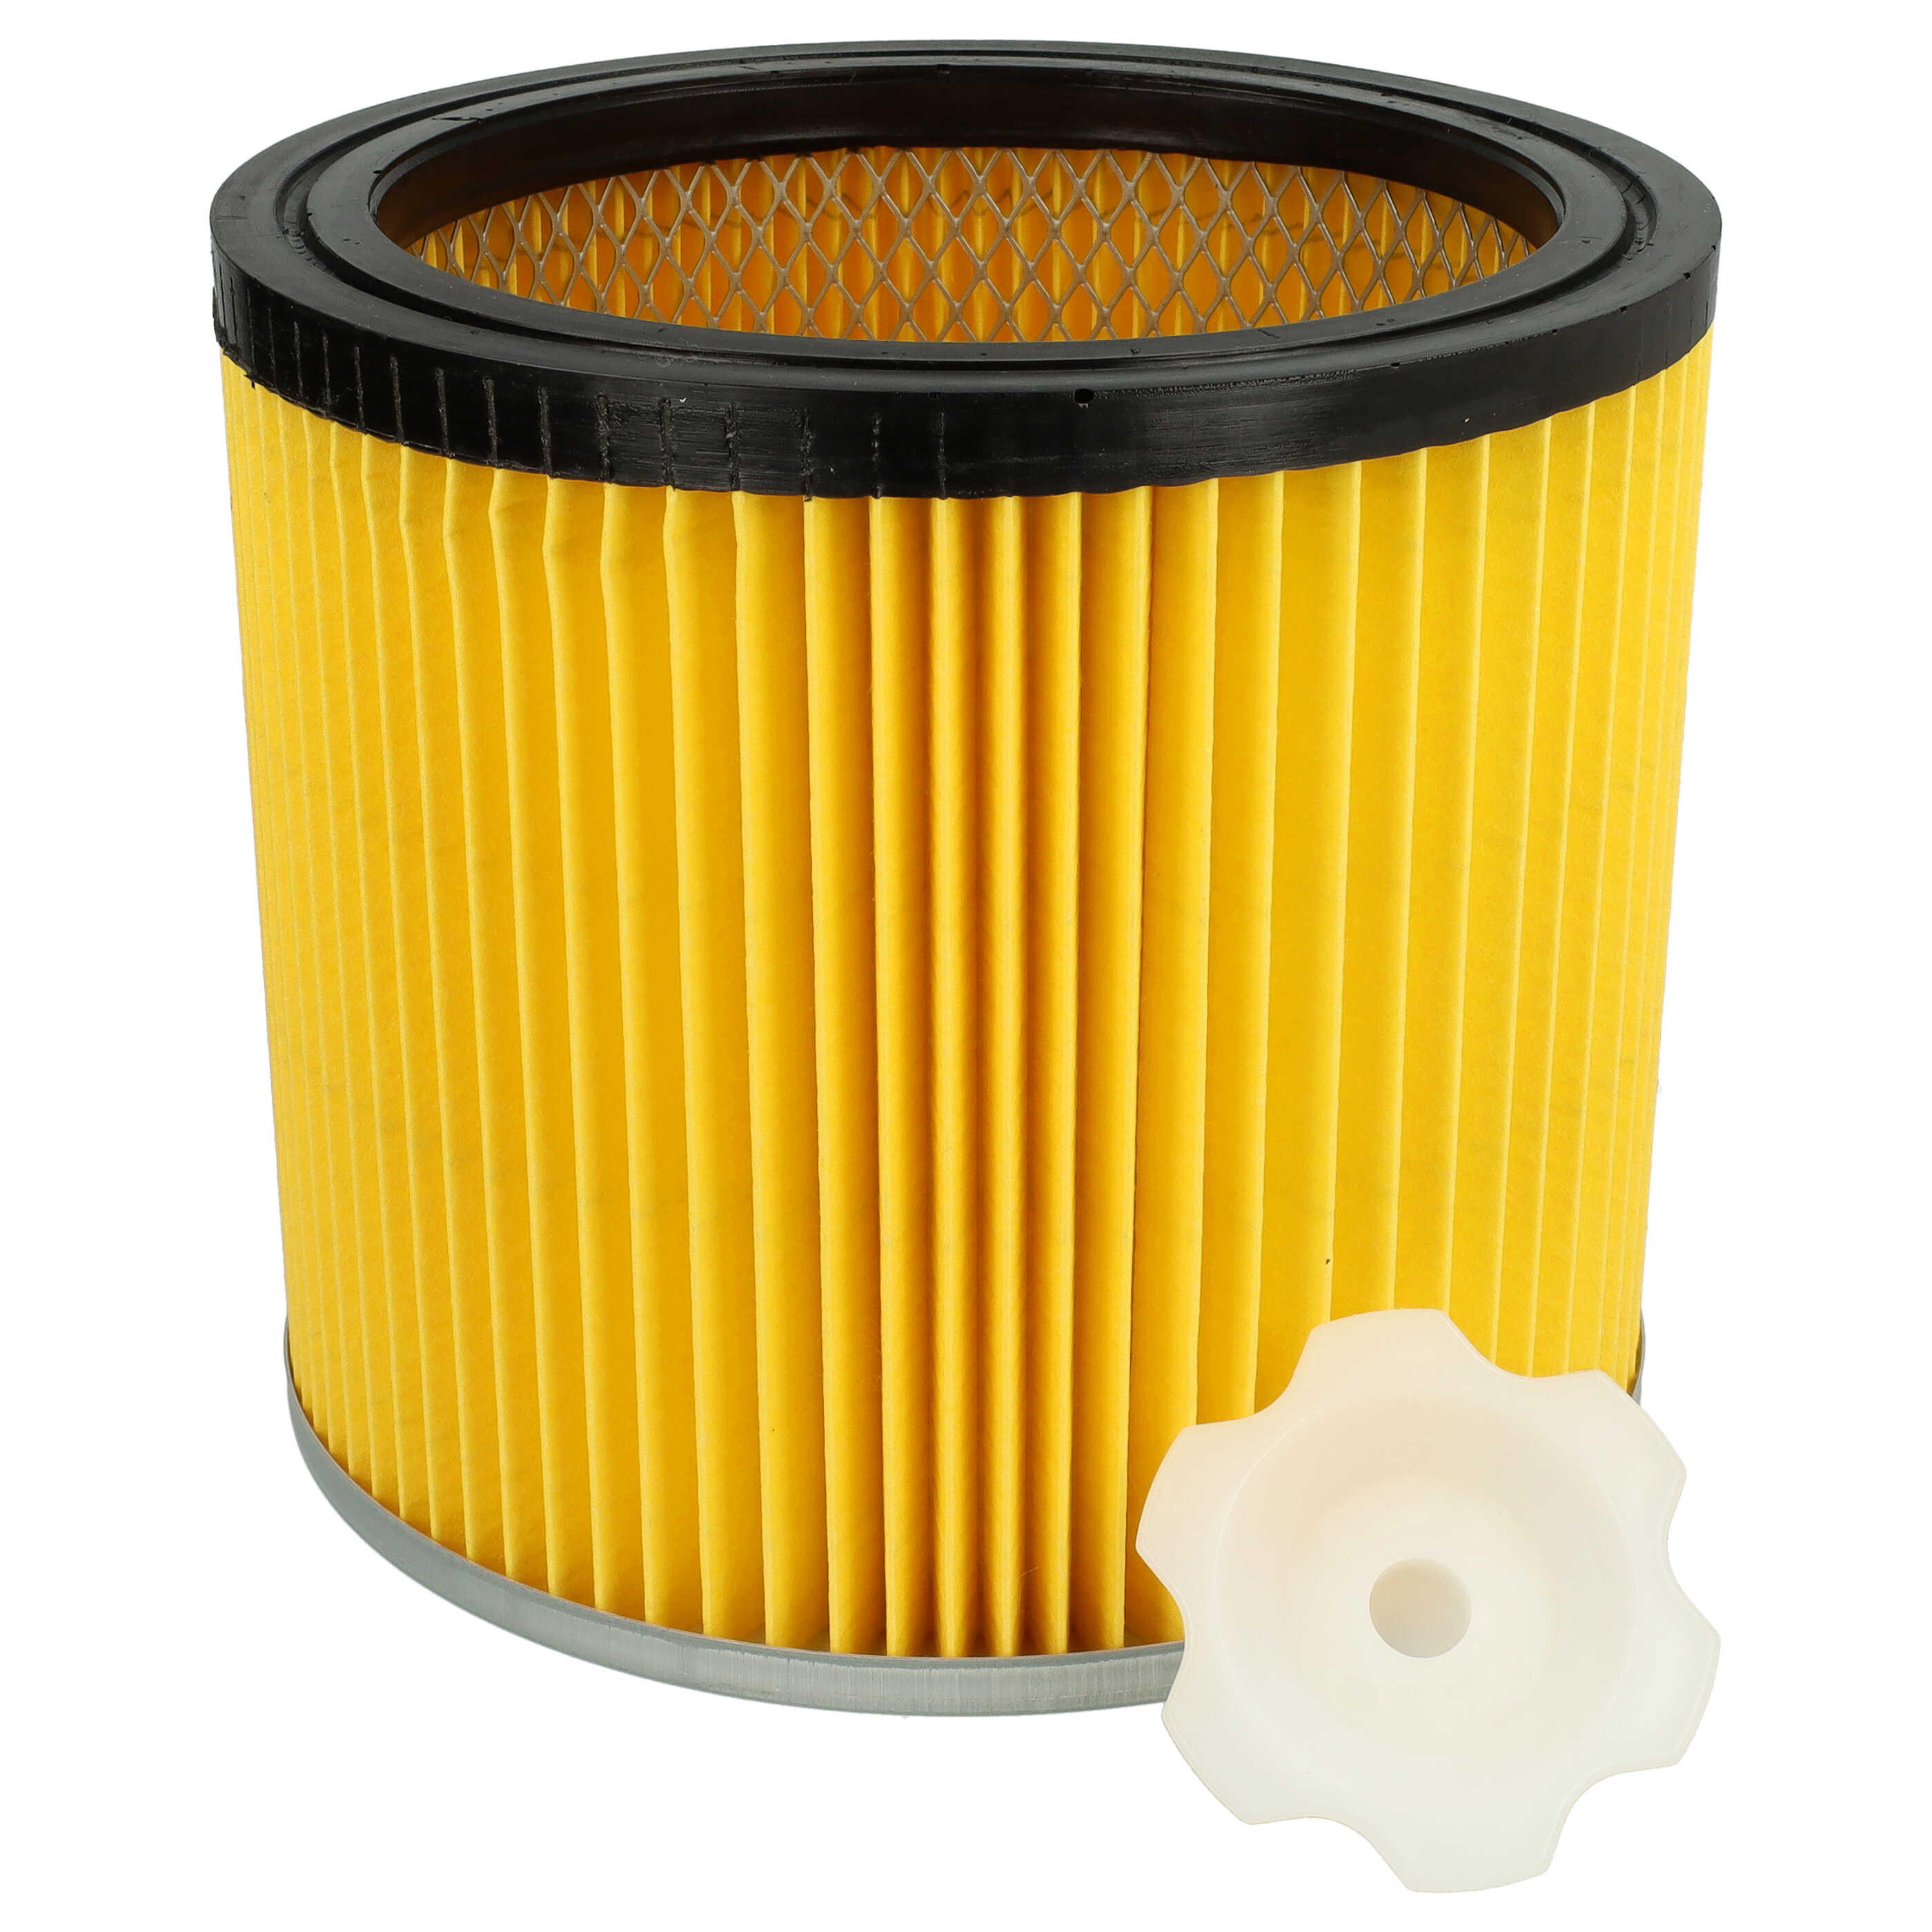 1x cartridge filter replaces Bosch 2 607 432 001, 2607432001 for BoschVacuum Cleaner, black / silver / yellow